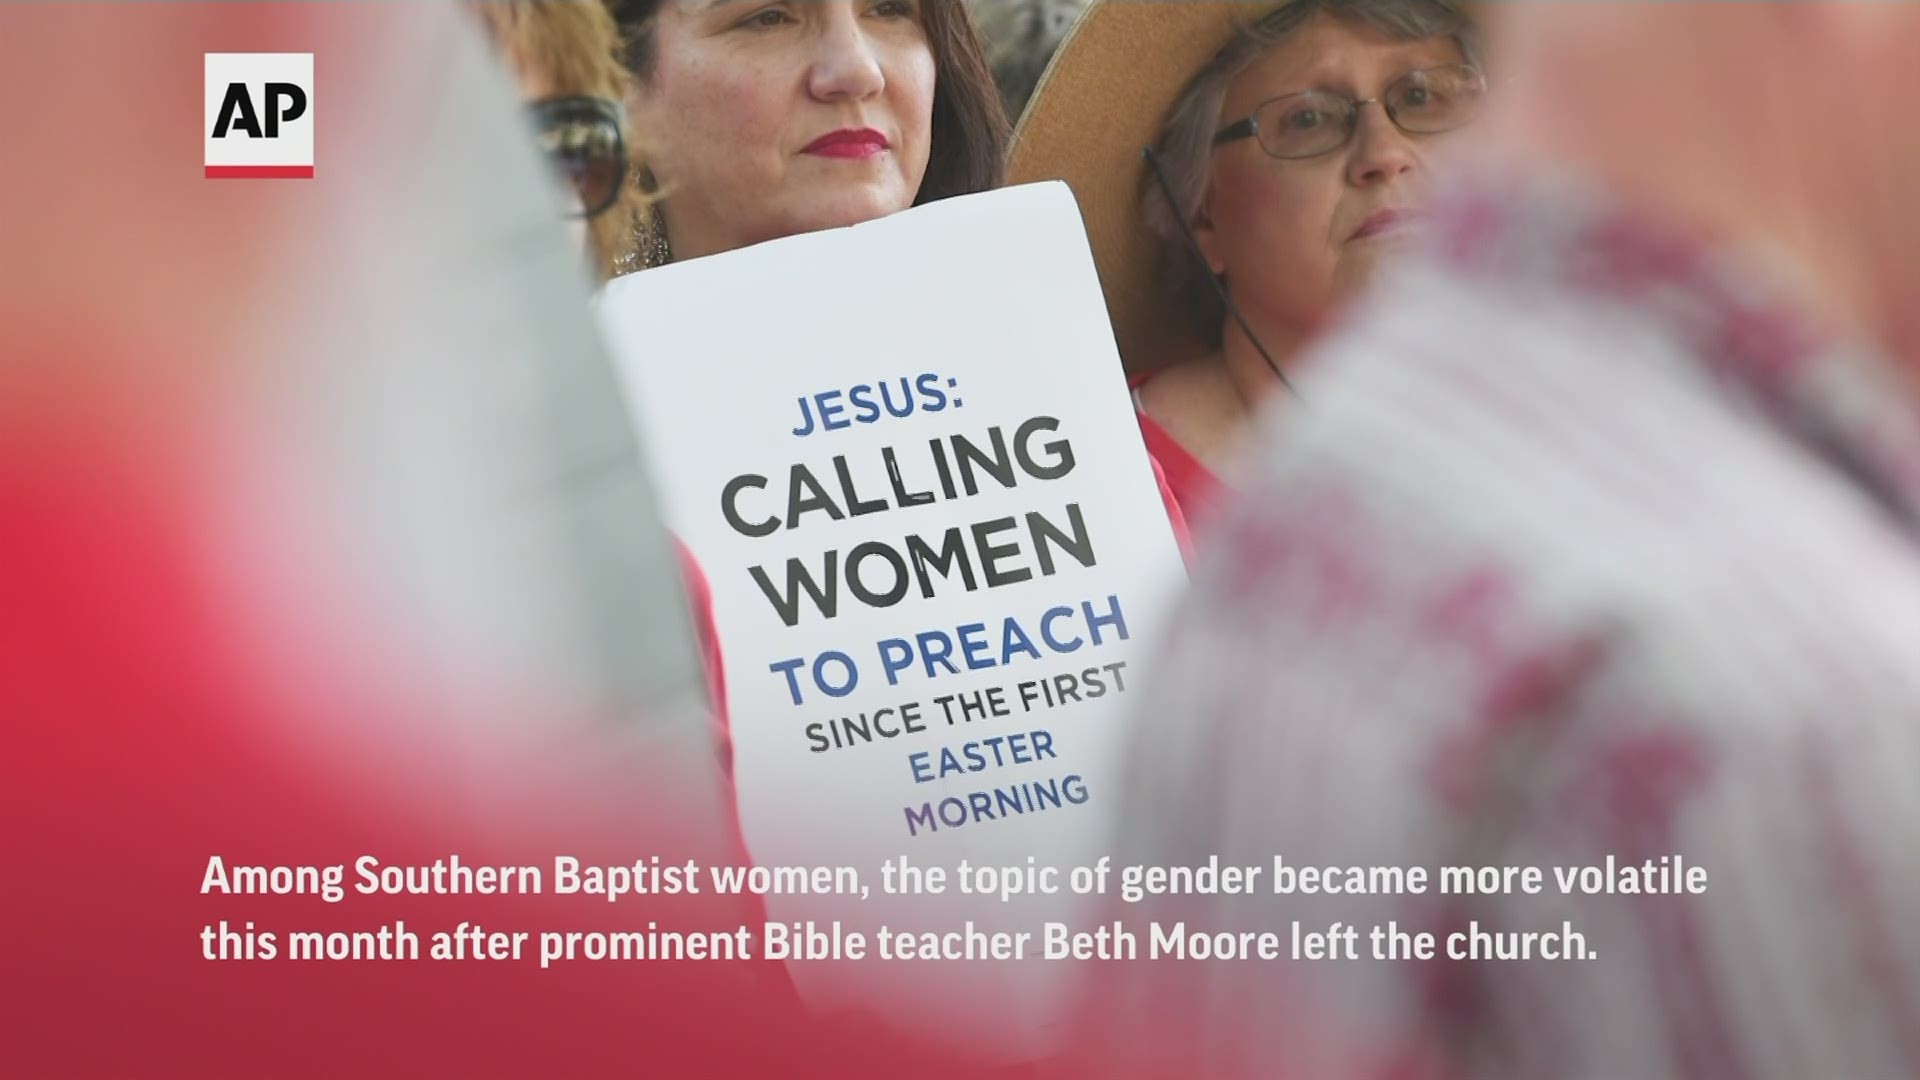 Among the millions of women remaining in the Southern Baptist Convention, many feel at home. But others question aspects of church teaching that limit women's roles.